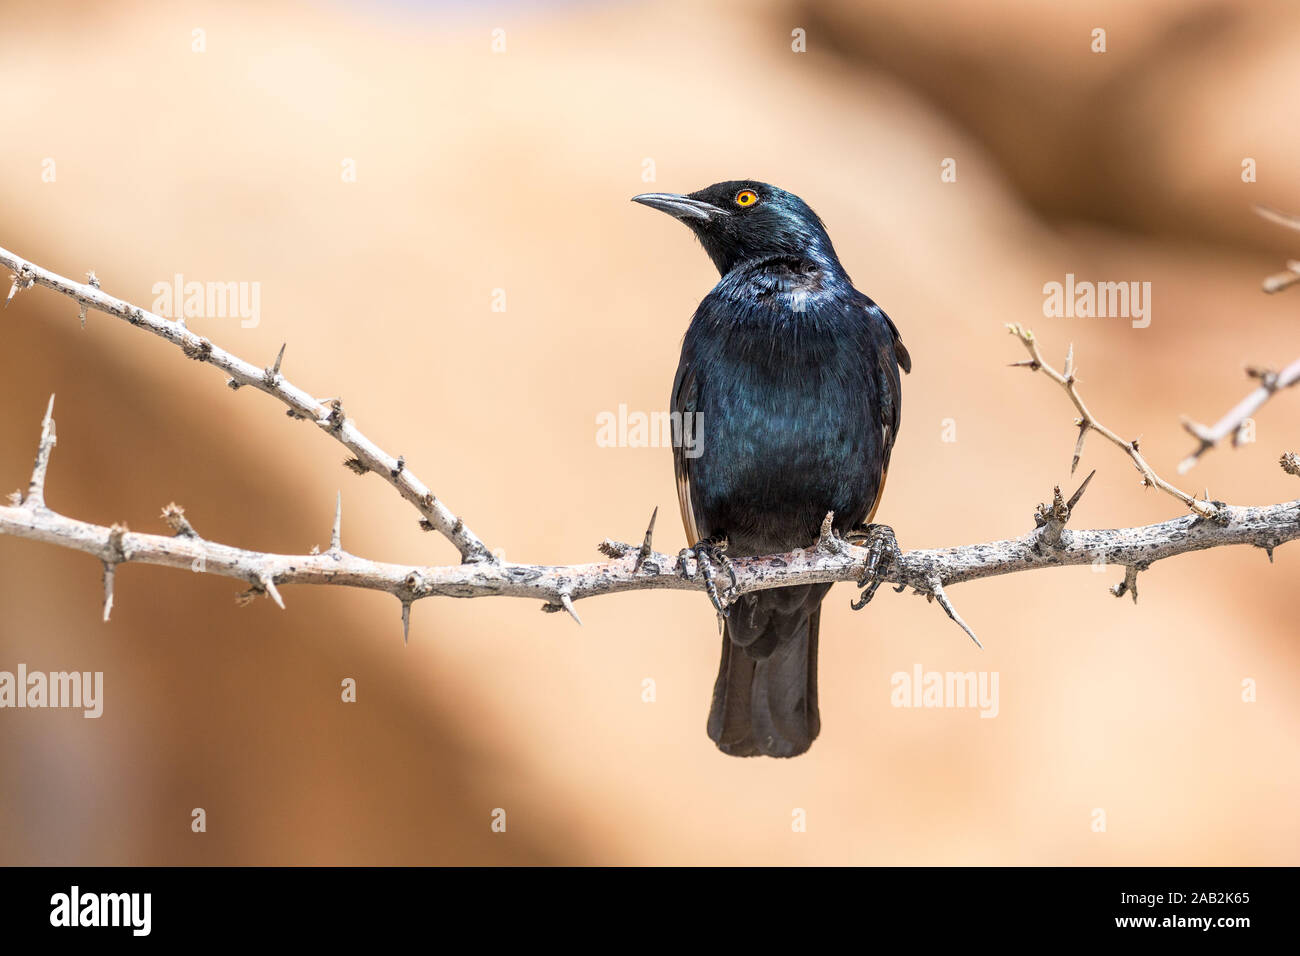 Pale-winged starling (Onychognathus nabouroup) assis sur une branche, Namibie Banque D'Images